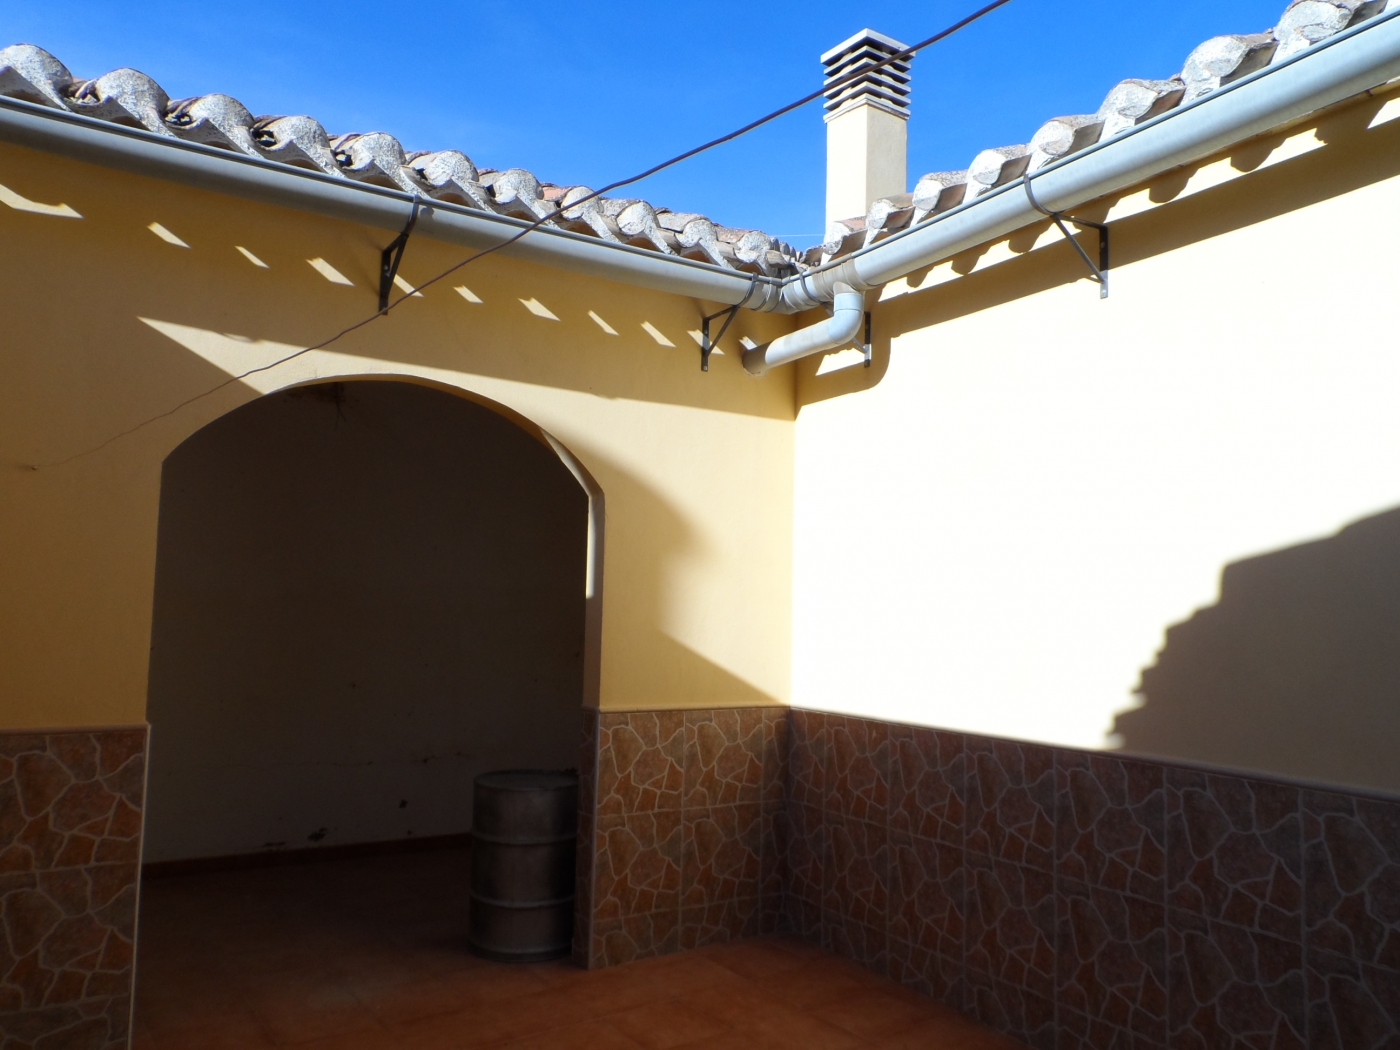 Countryhome for sale in Lorca 19